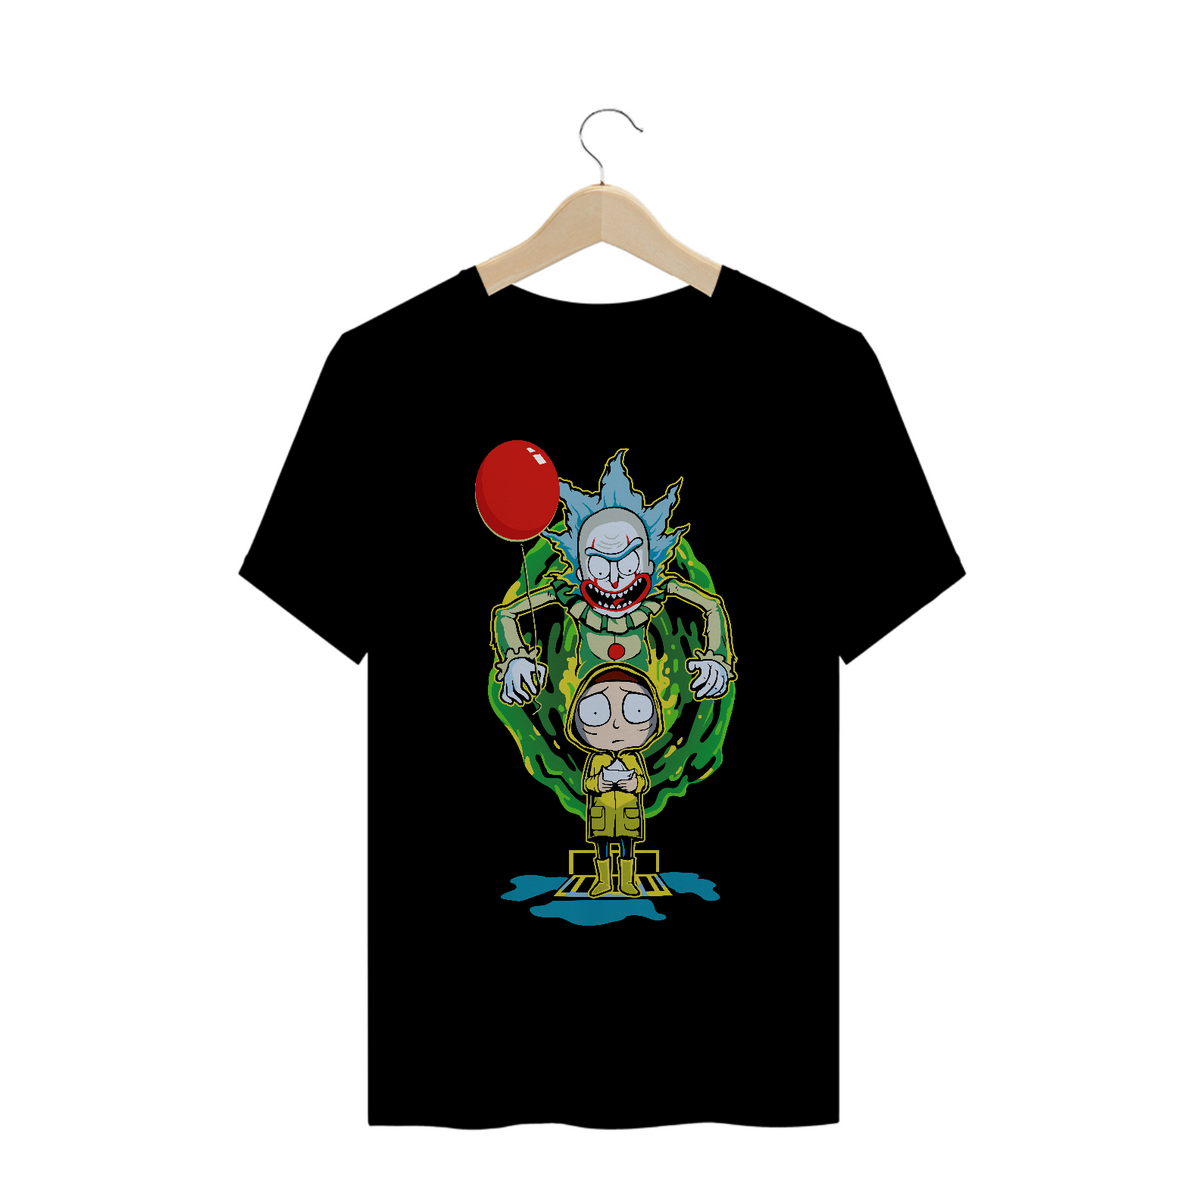 Nome do produto: Camiseta Rick and Morty Pennywise